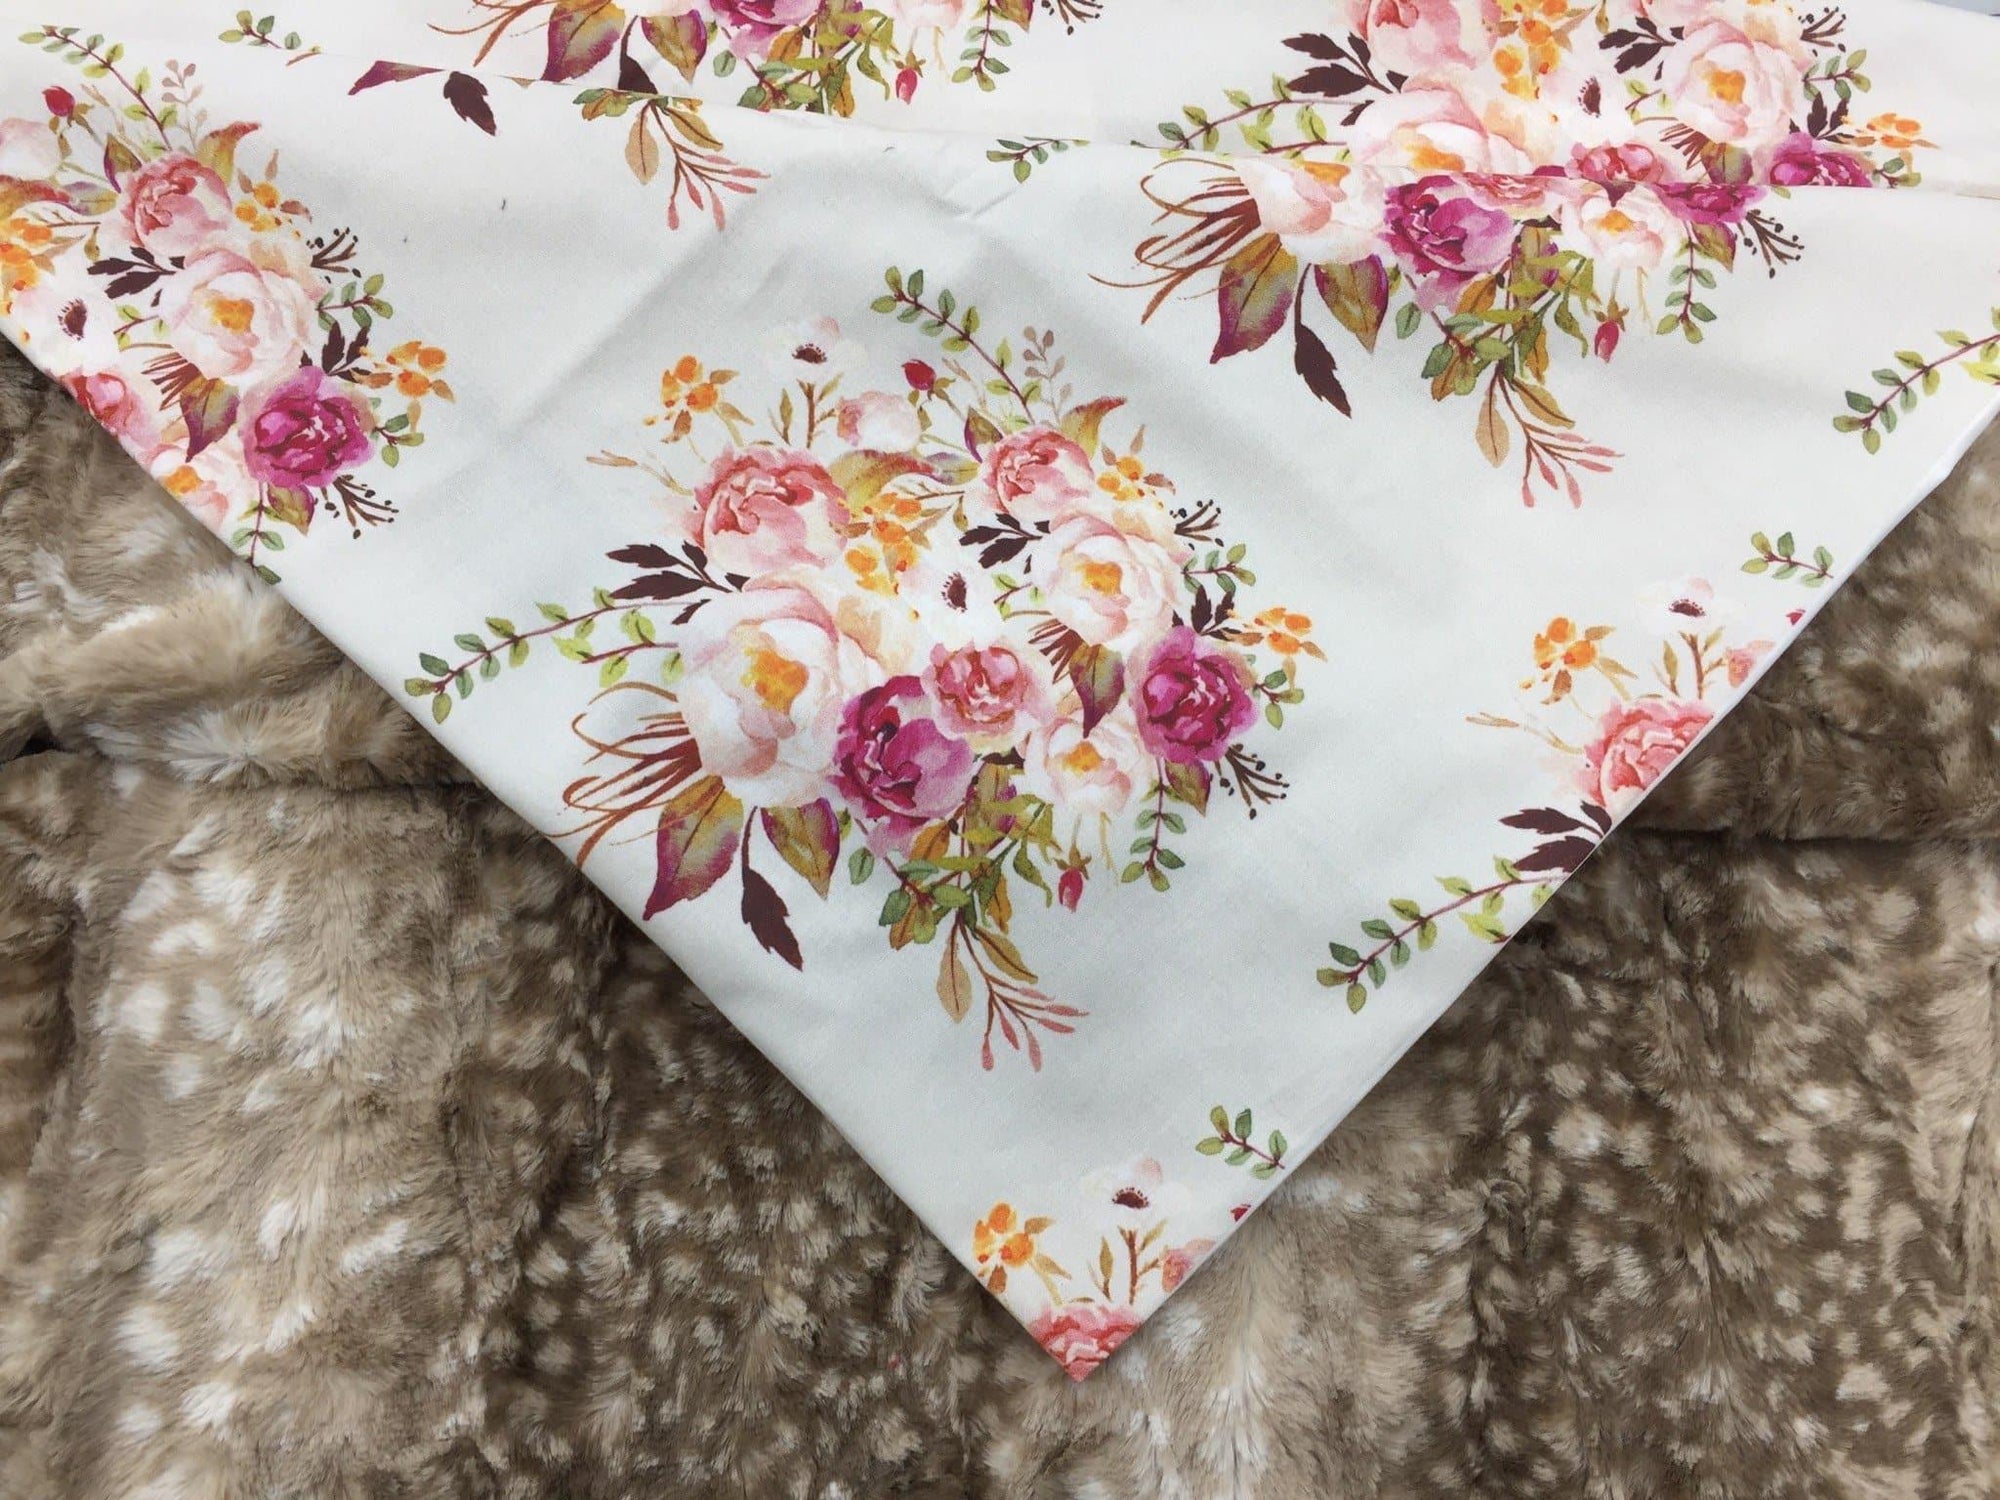 Standard blanket- Antique Floral and Fawn Minky Blanket - DBC Baby Bedding Co 